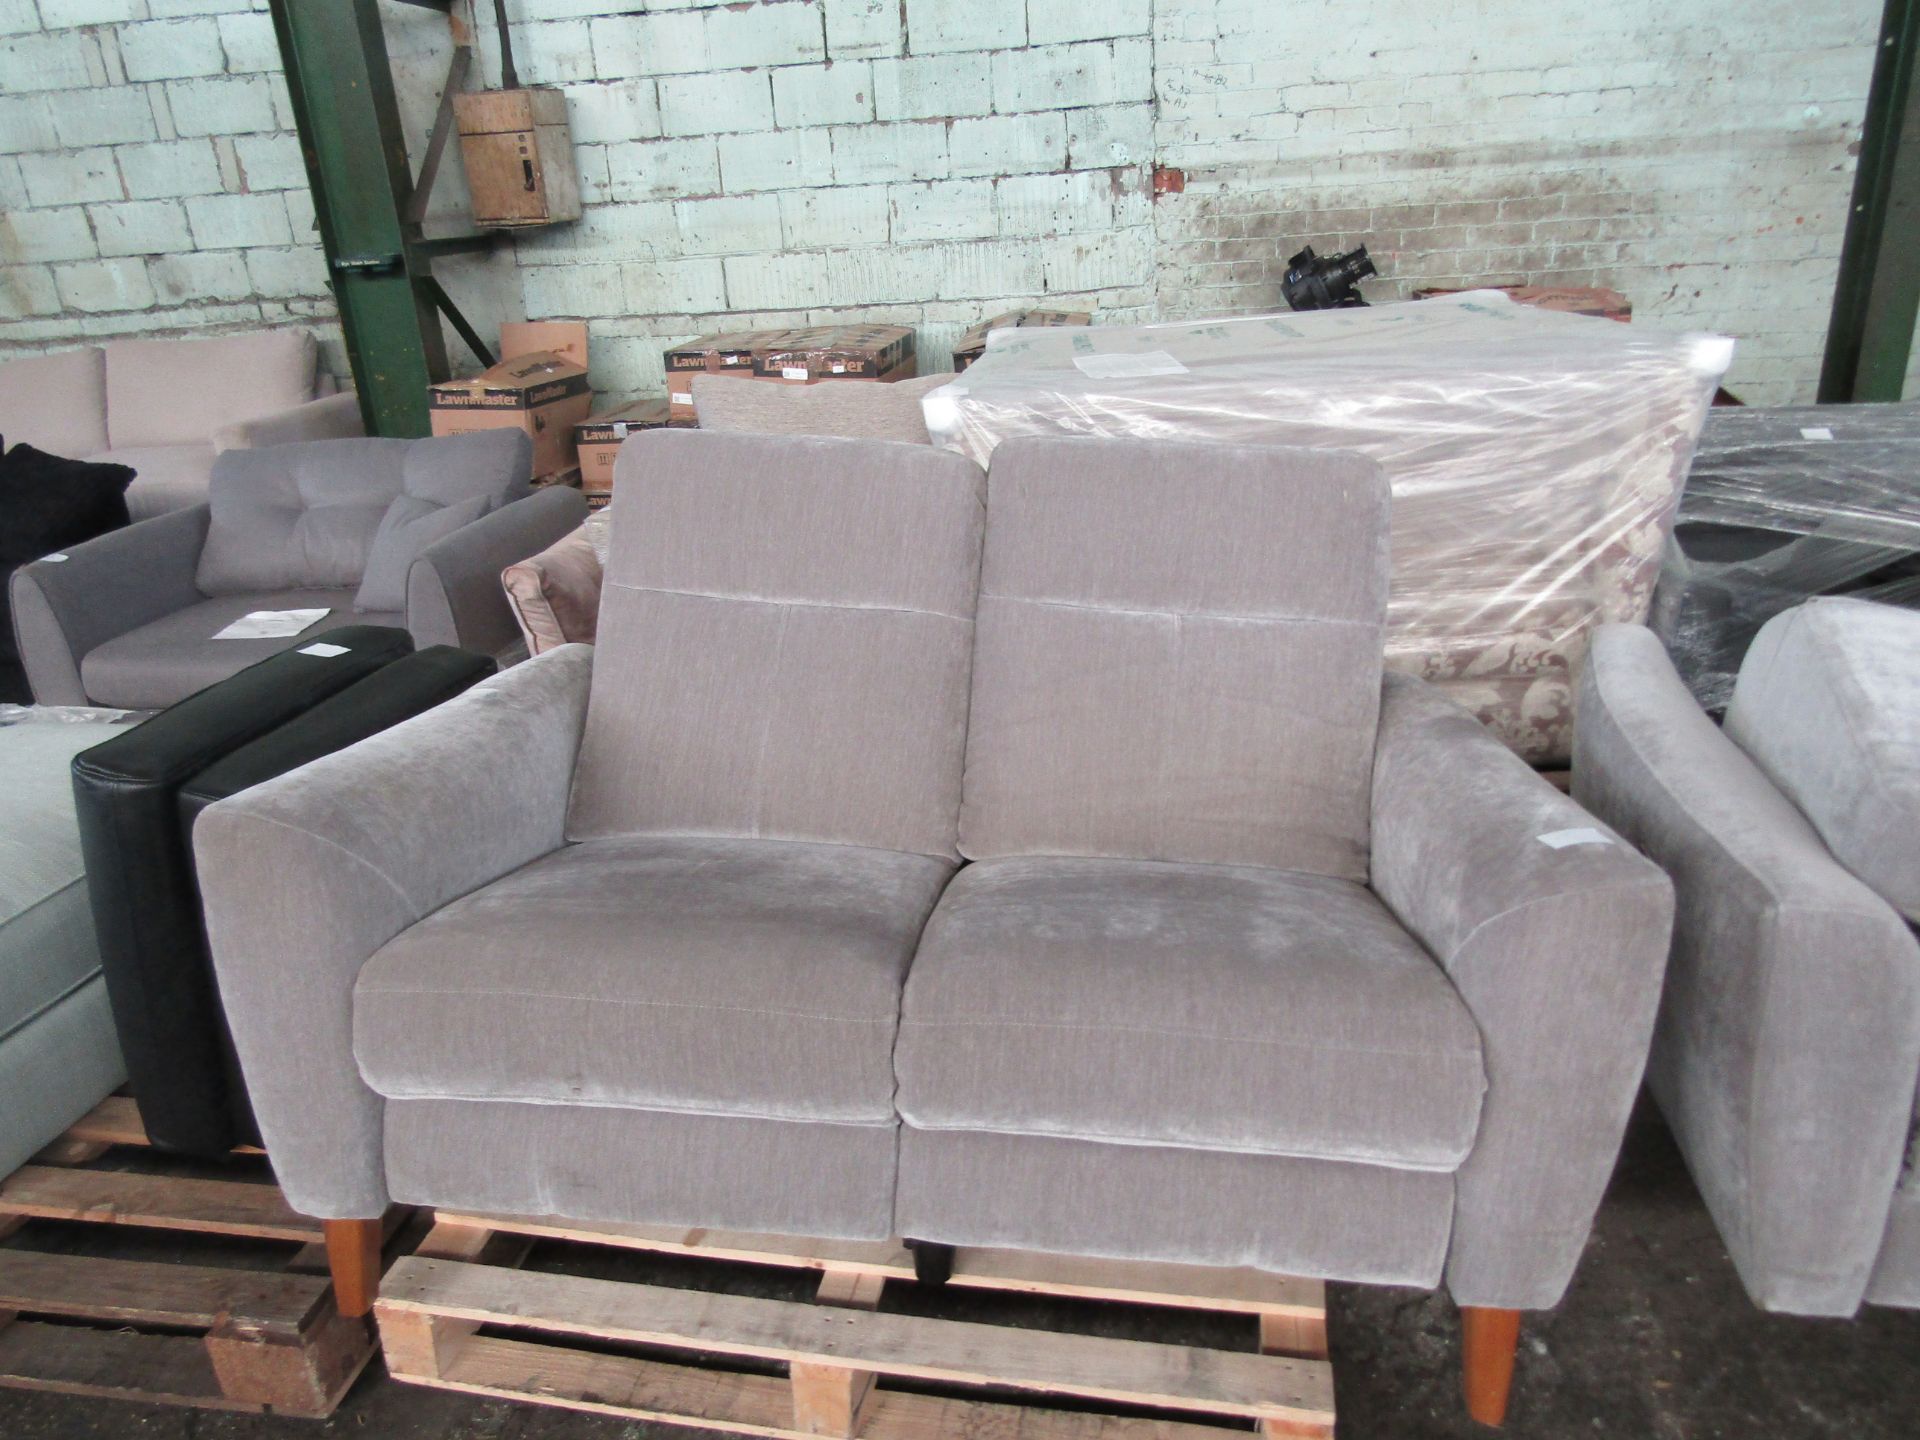 Oak Furnitureland Dylan 2 Seater Electric Recliner Sofa in Oxford Grey Fabric RRP 999.99Our Dylan - Image 2 of 2